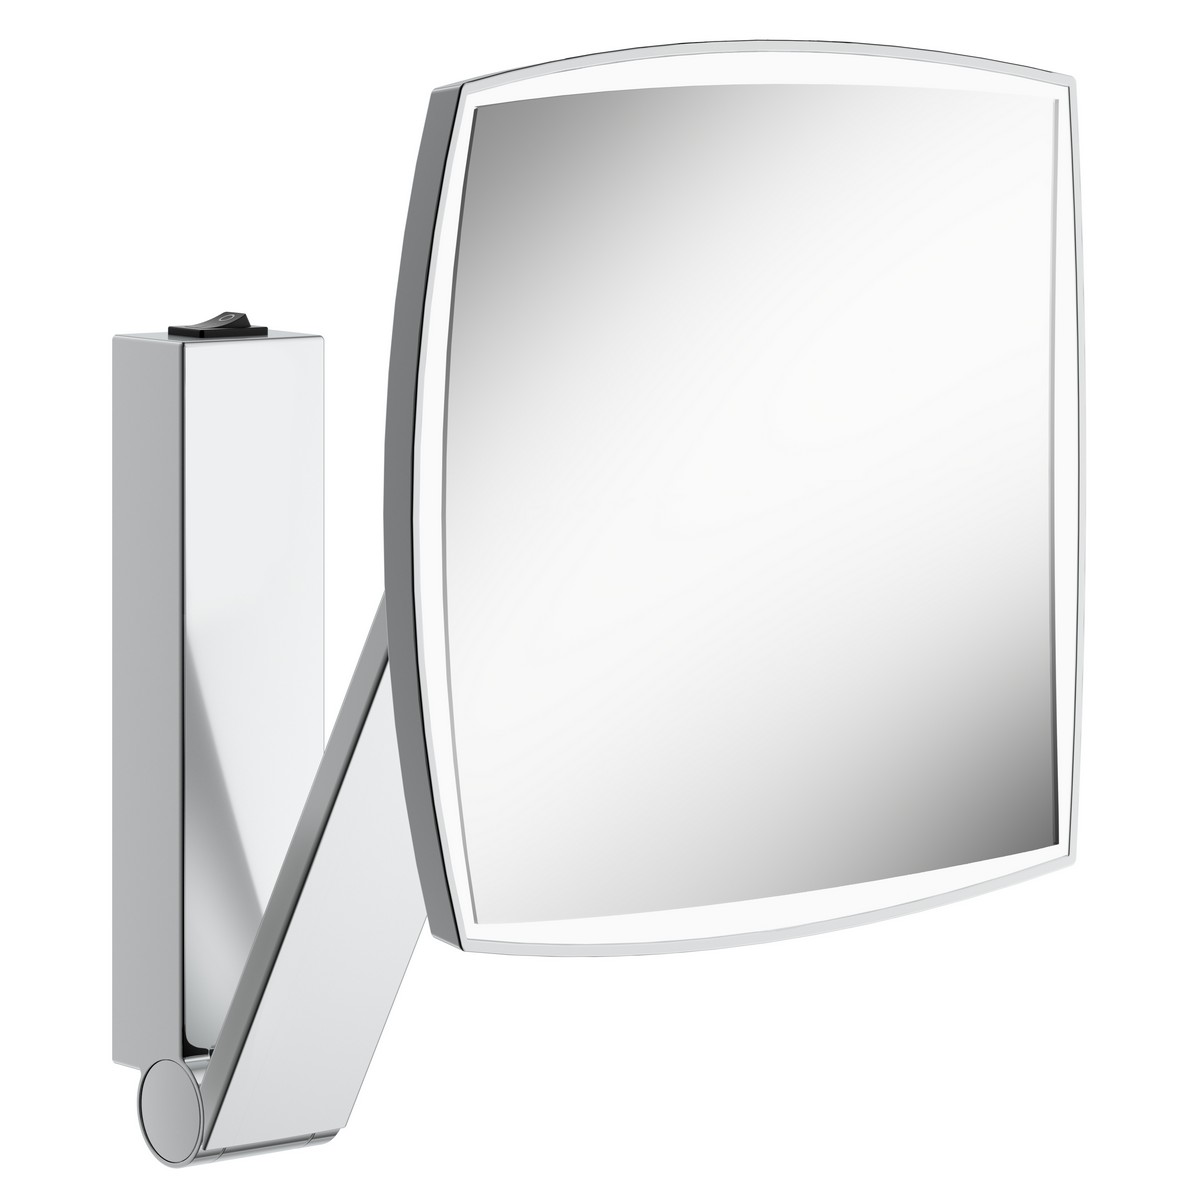 KEUCO 17613054 ILOOK MOVE 7 7/8 INCH WALL MOUNTED FRAMED ROUND 6000K LED BATHROOM MIRROR WITH ROCKER SWITCH OPERATION